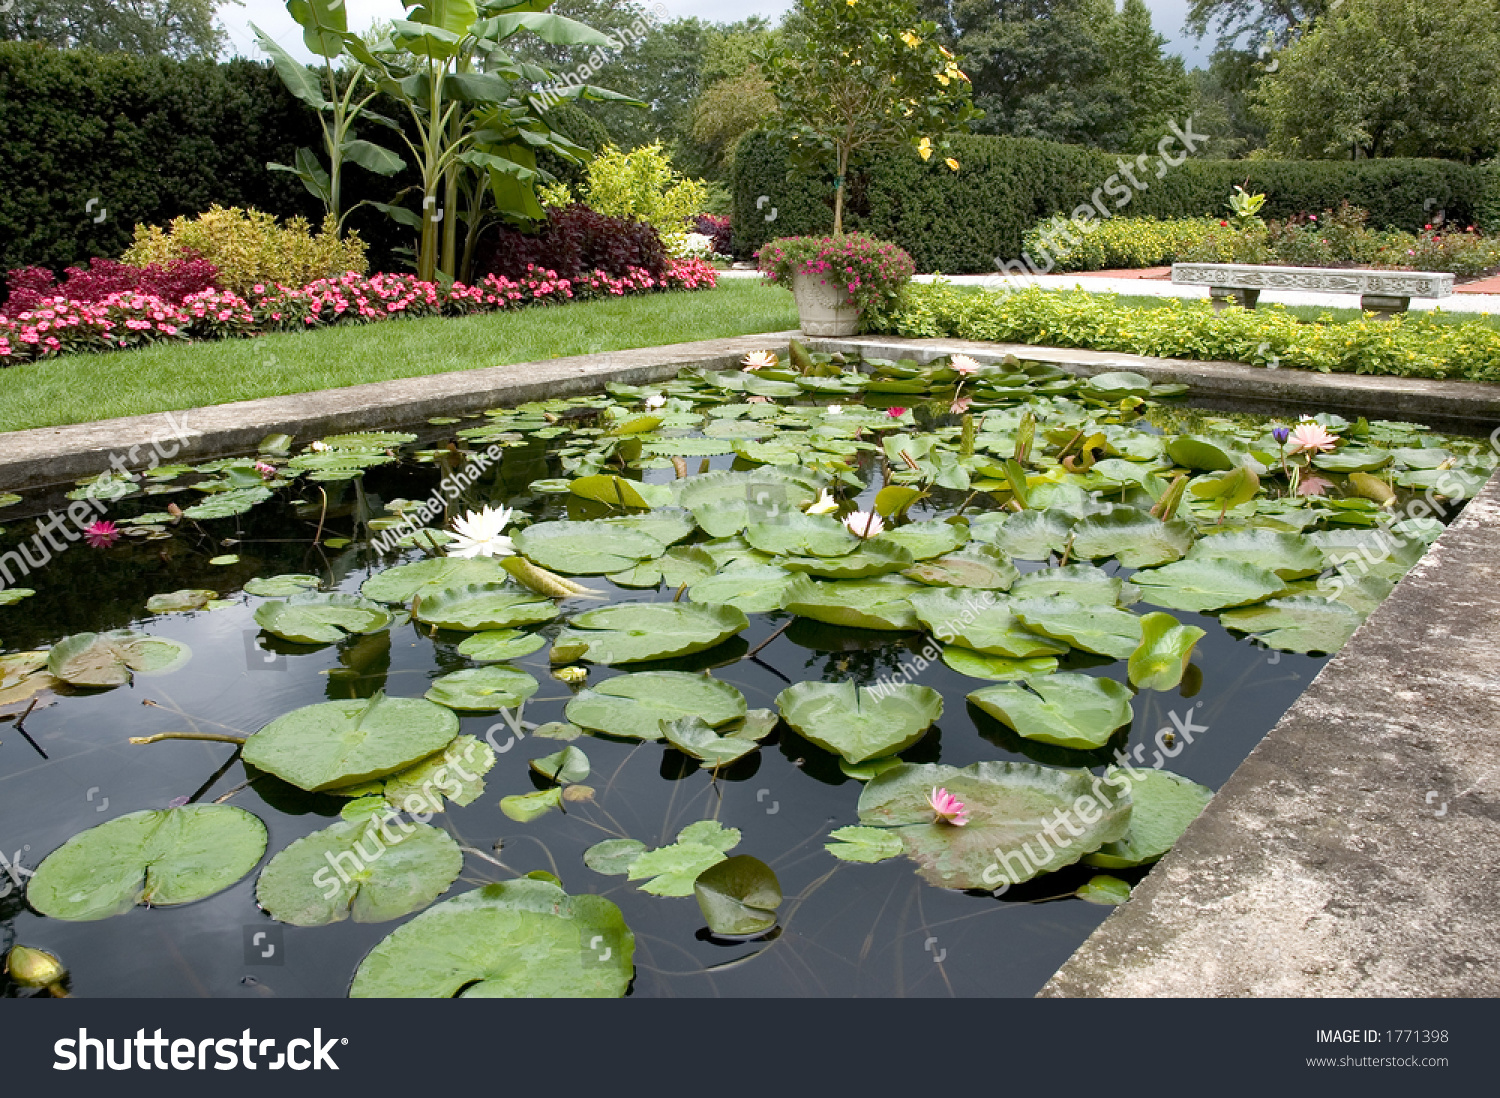 A Beautiful Formal Water Garden Pond Full Of Beautiful And Colorful